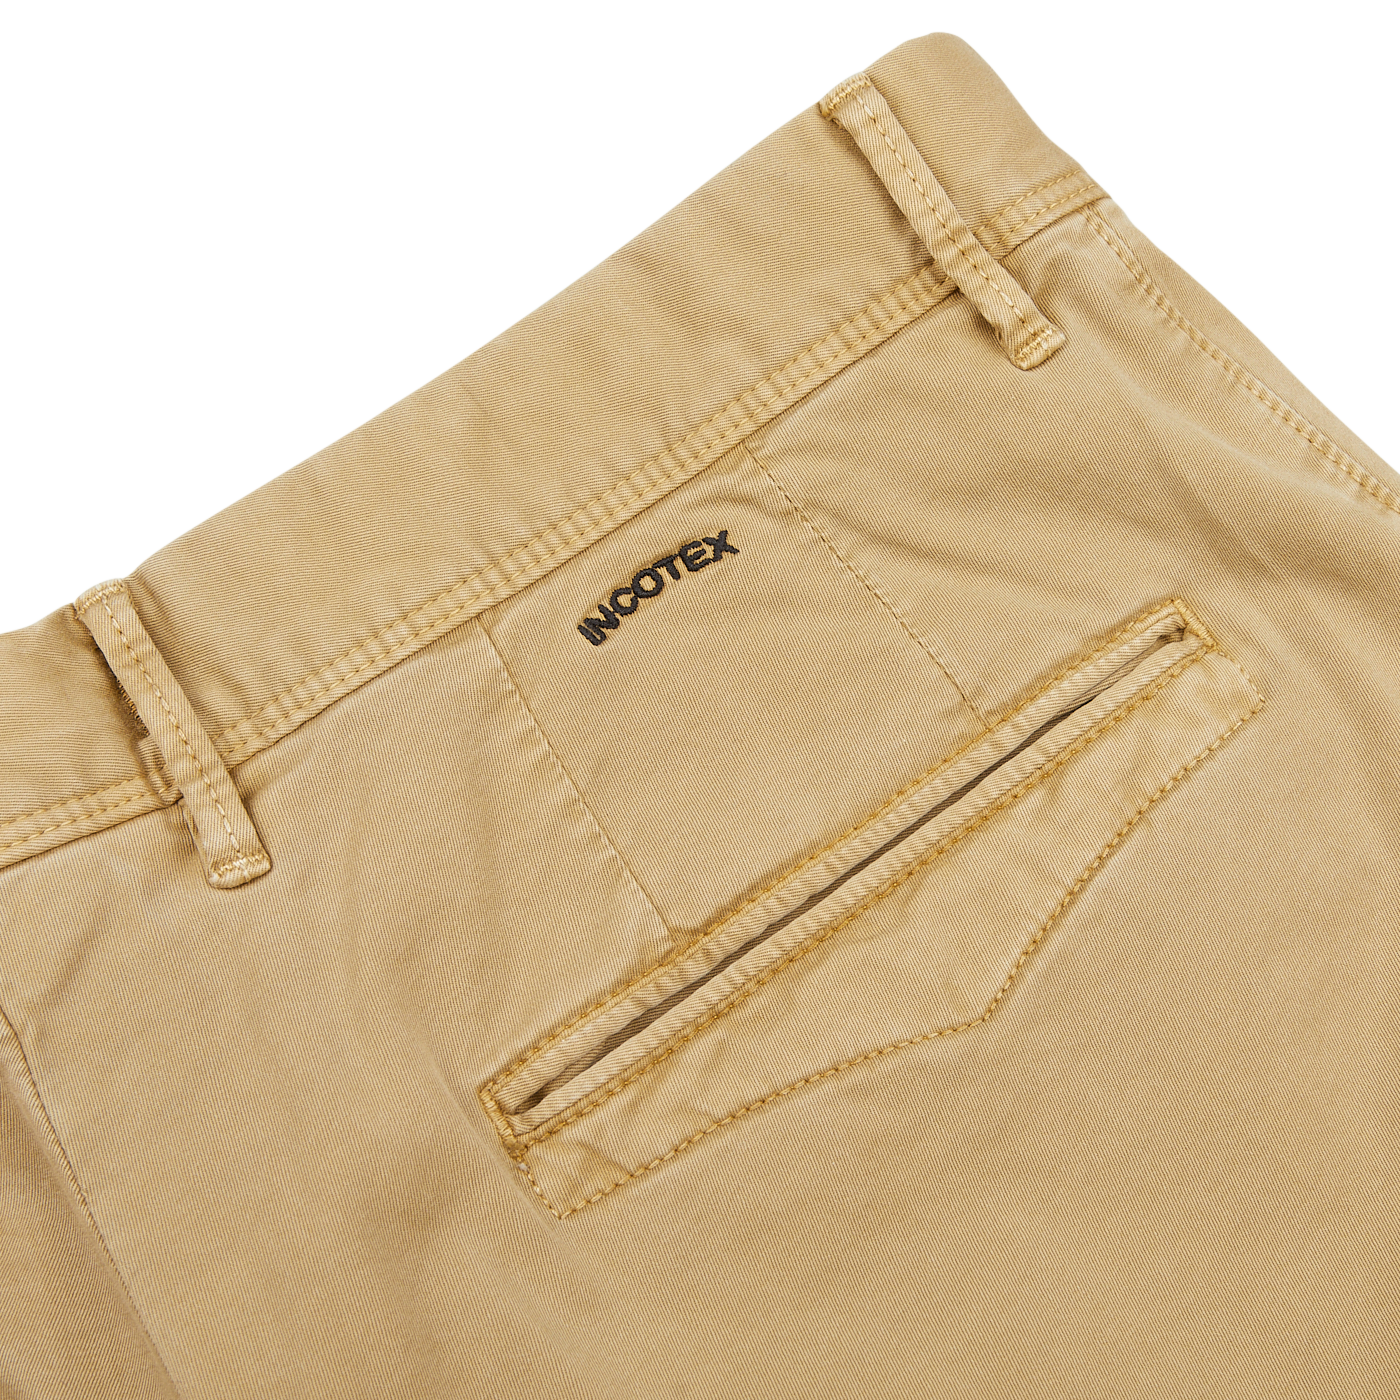 Close-up of Dark Beige Cotton Stretch Slacks Chinos, featuring a back pocket and belt loops. The brand name "Incotex" is embroidered above the pocket. These cotton twill chinos boast a slim fit tapered leg for a modern look.